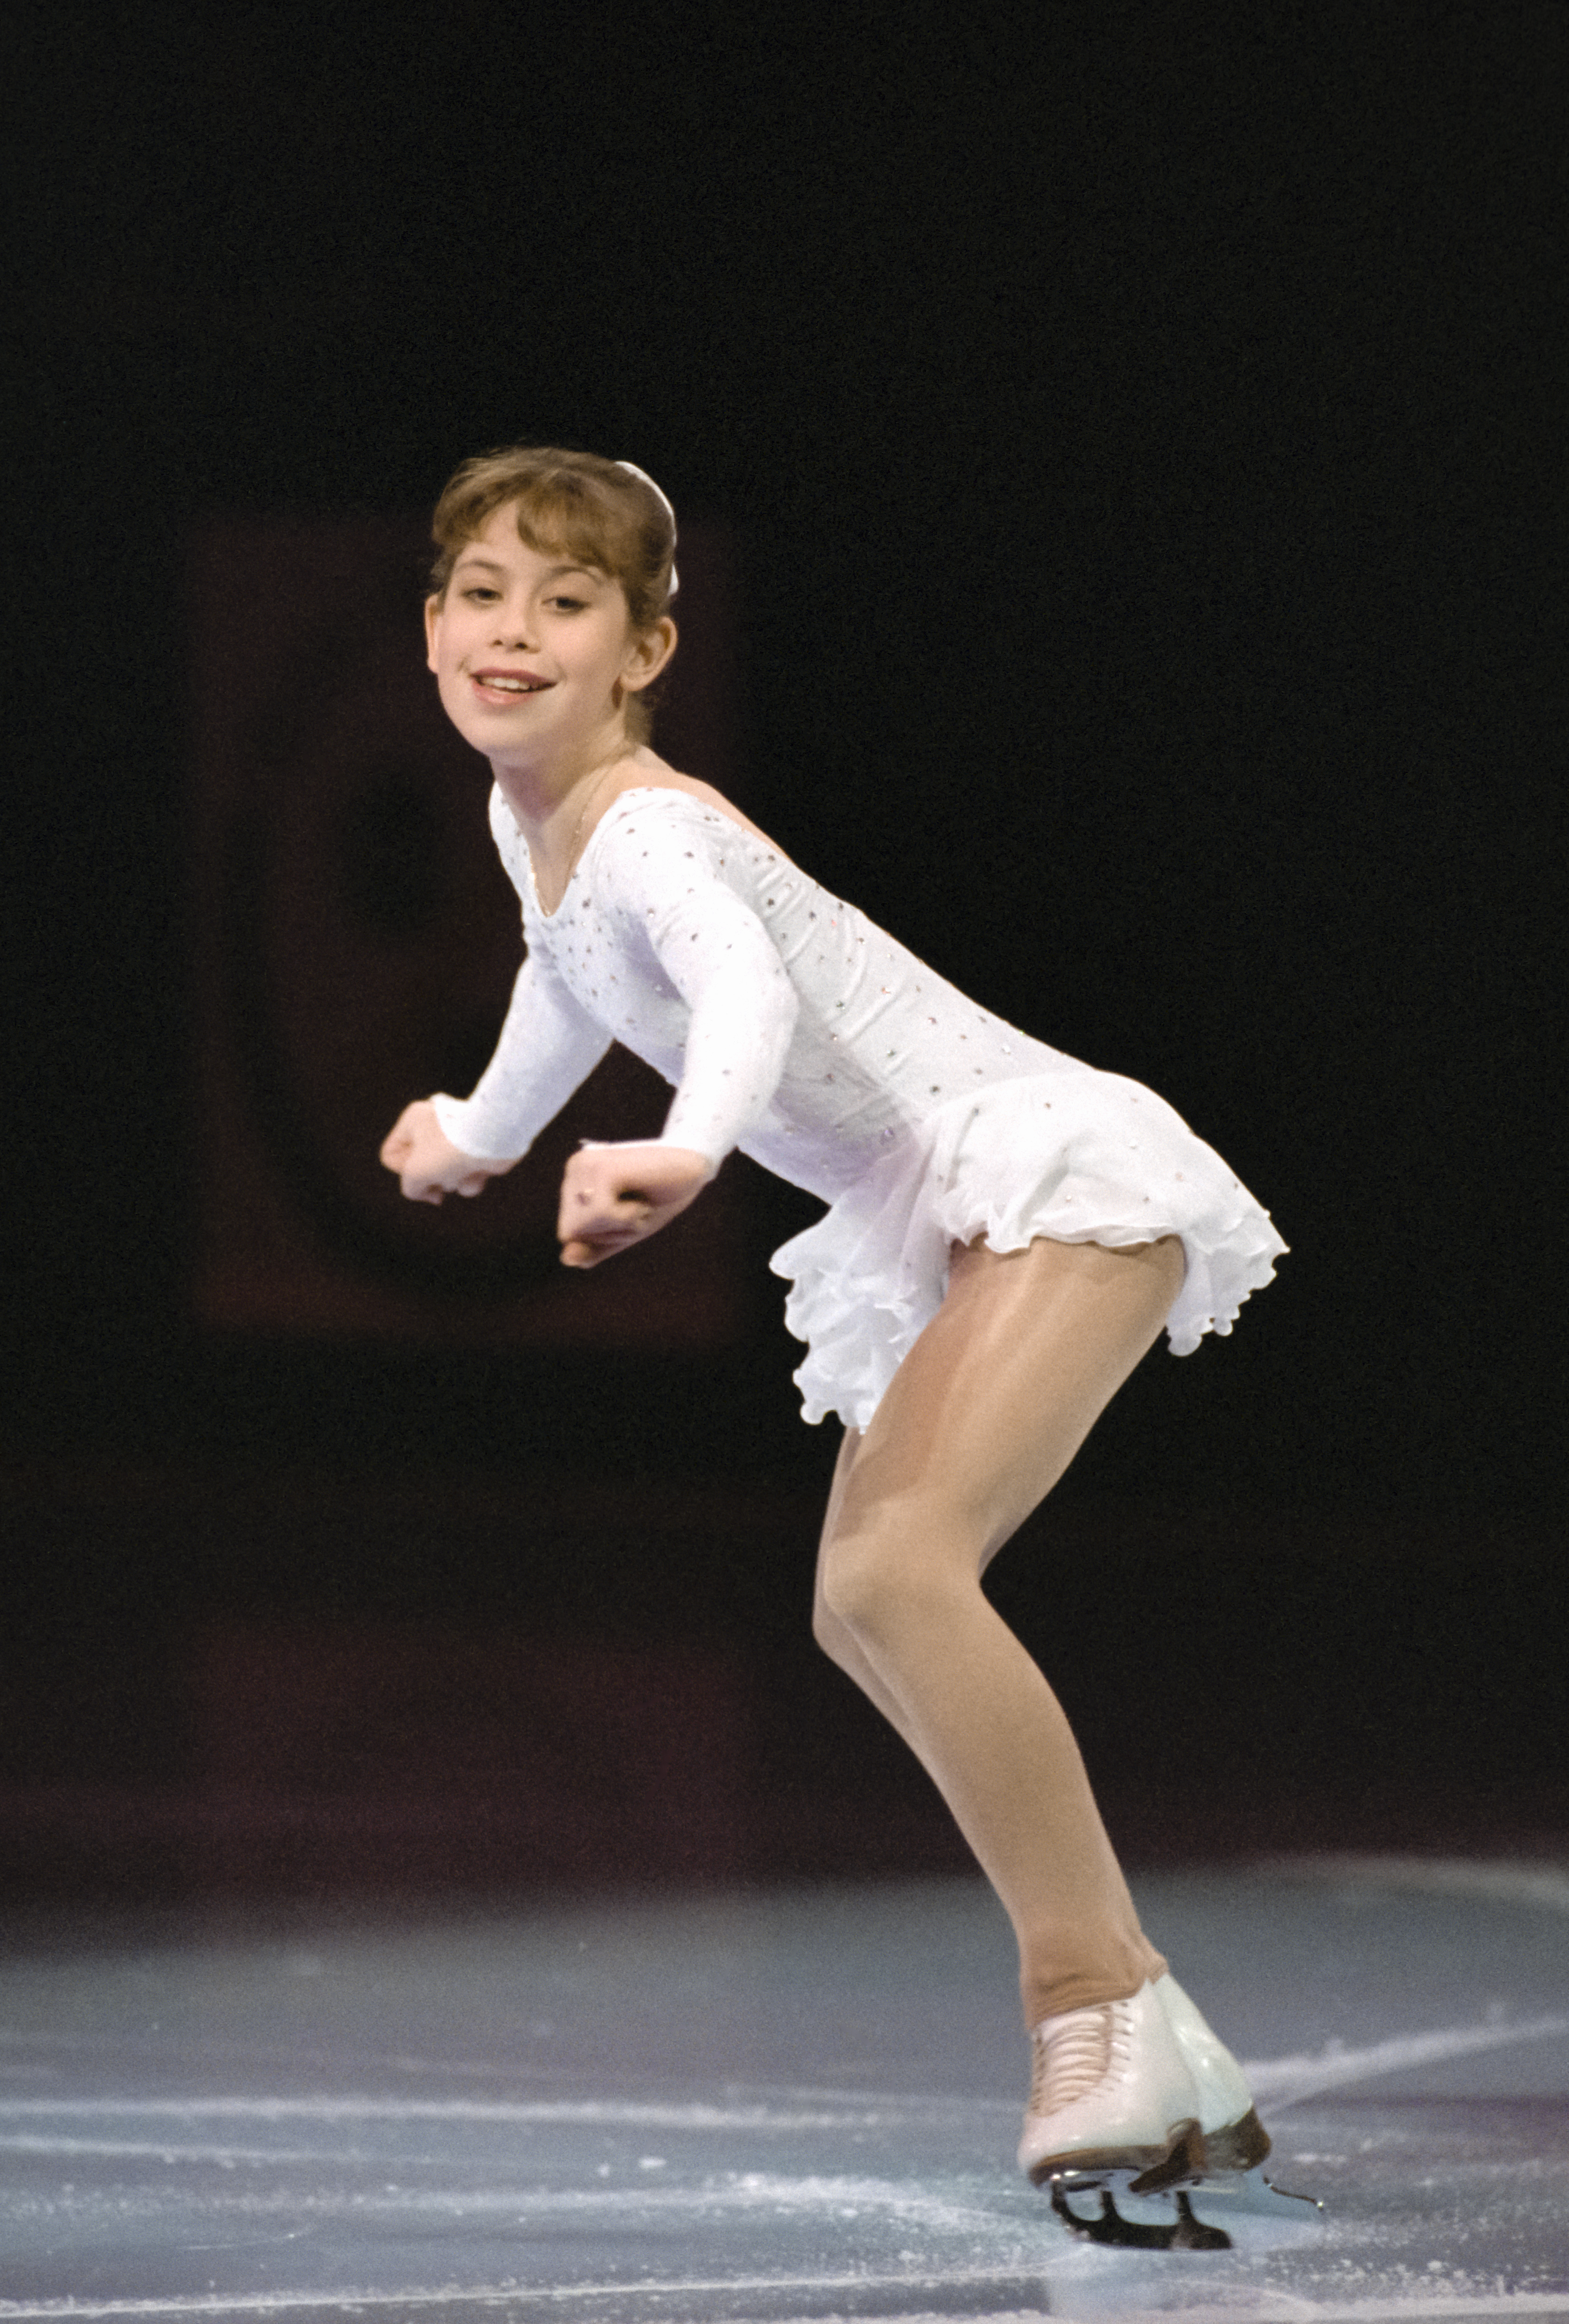 Tara Lipinski, representing the USA, performs at the 1996 United States Figure Skating Championships Exhibition on January 21, 1996, in San Jose, California | Source: Getty Images